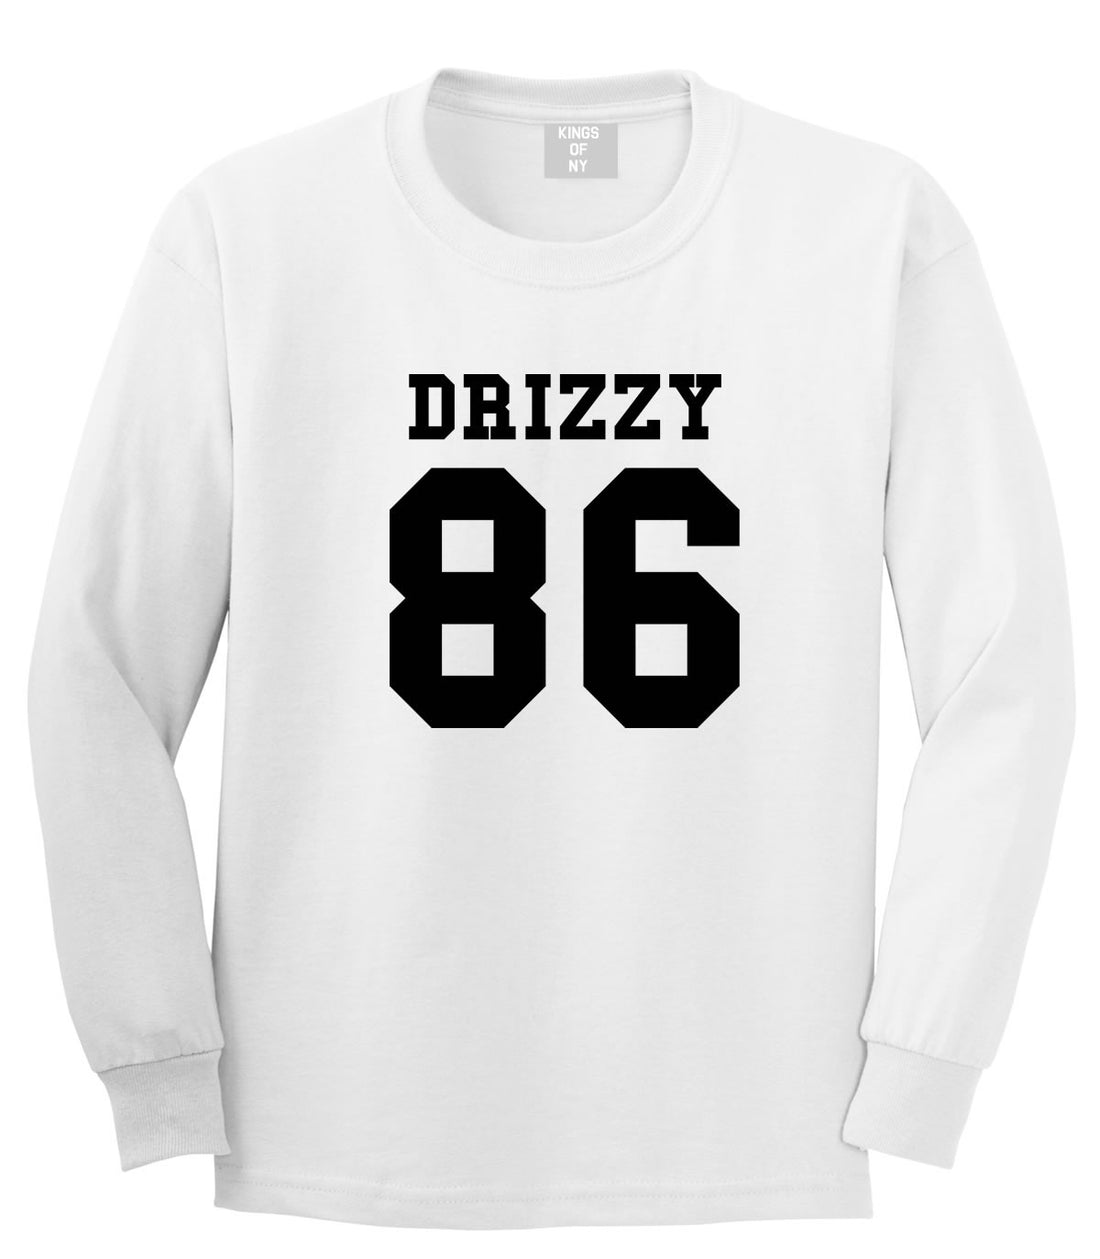 Drizzy 86 Team Jersey Long Sleeve T-Shirt in White by Kings Of NY